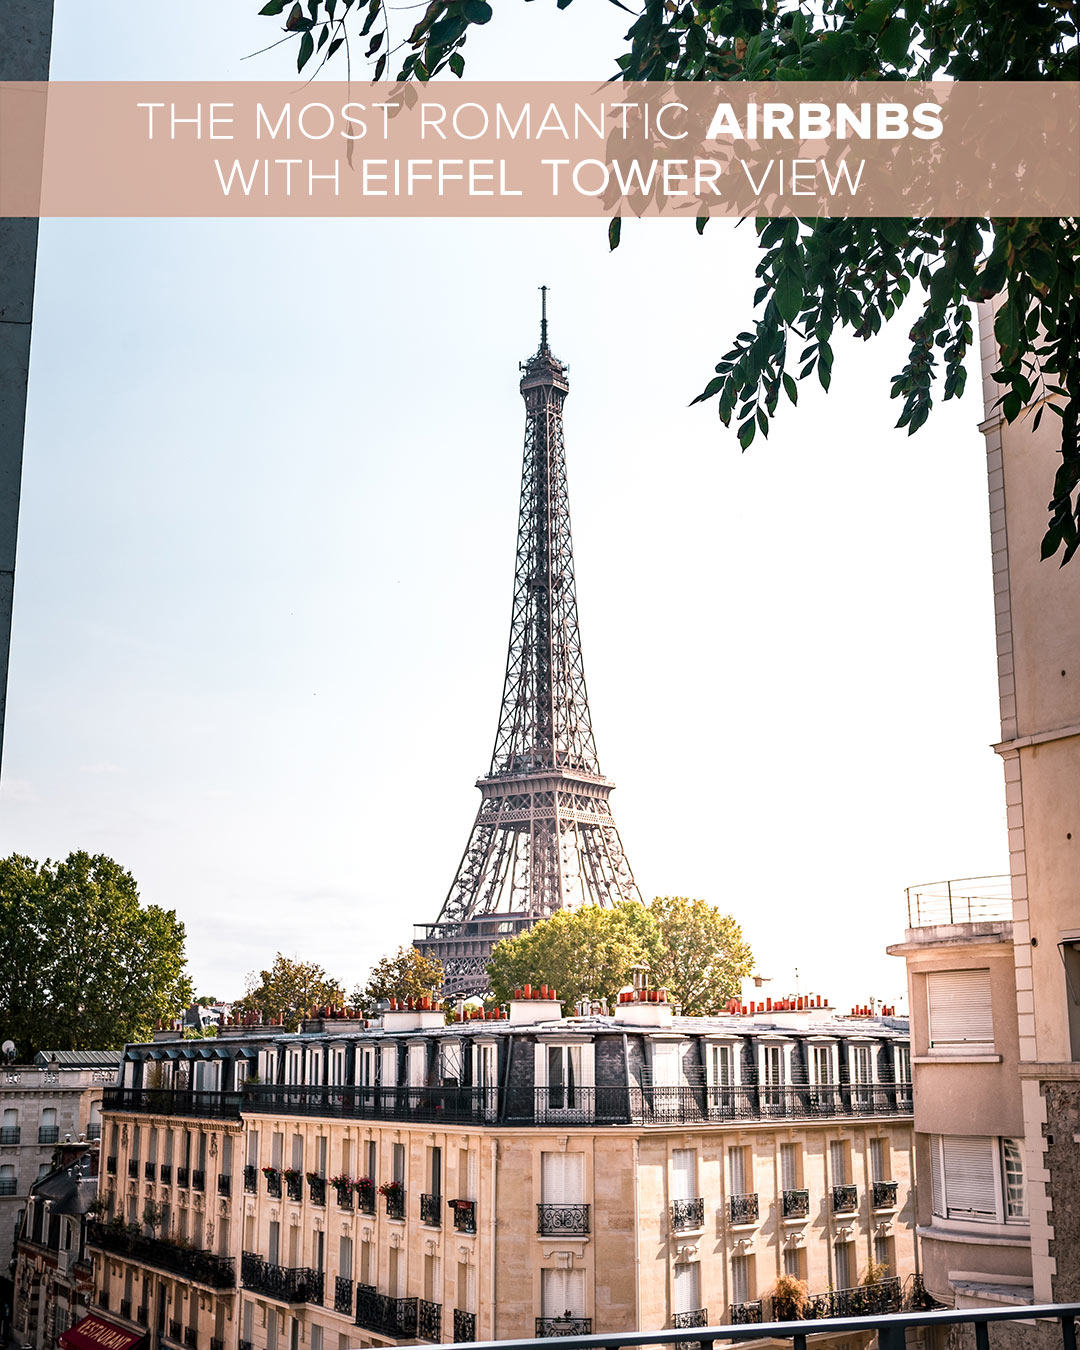 The Most Romantic Airbnbs With Eiffel Tower View